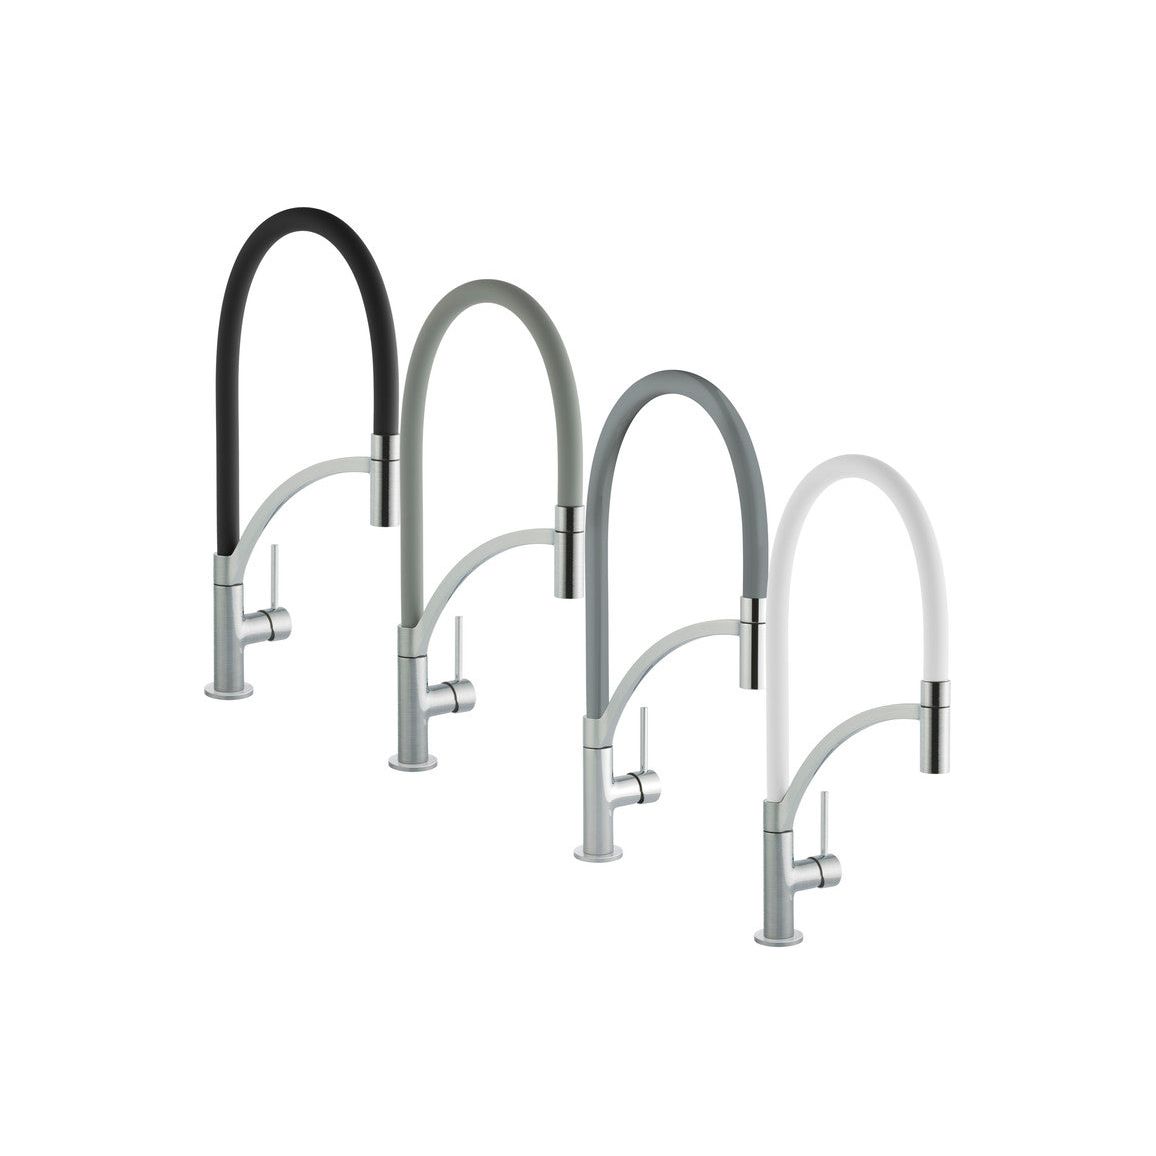 Prima+ Swan Neck Single Lever Mixer Tap w/Pull Out - Grey